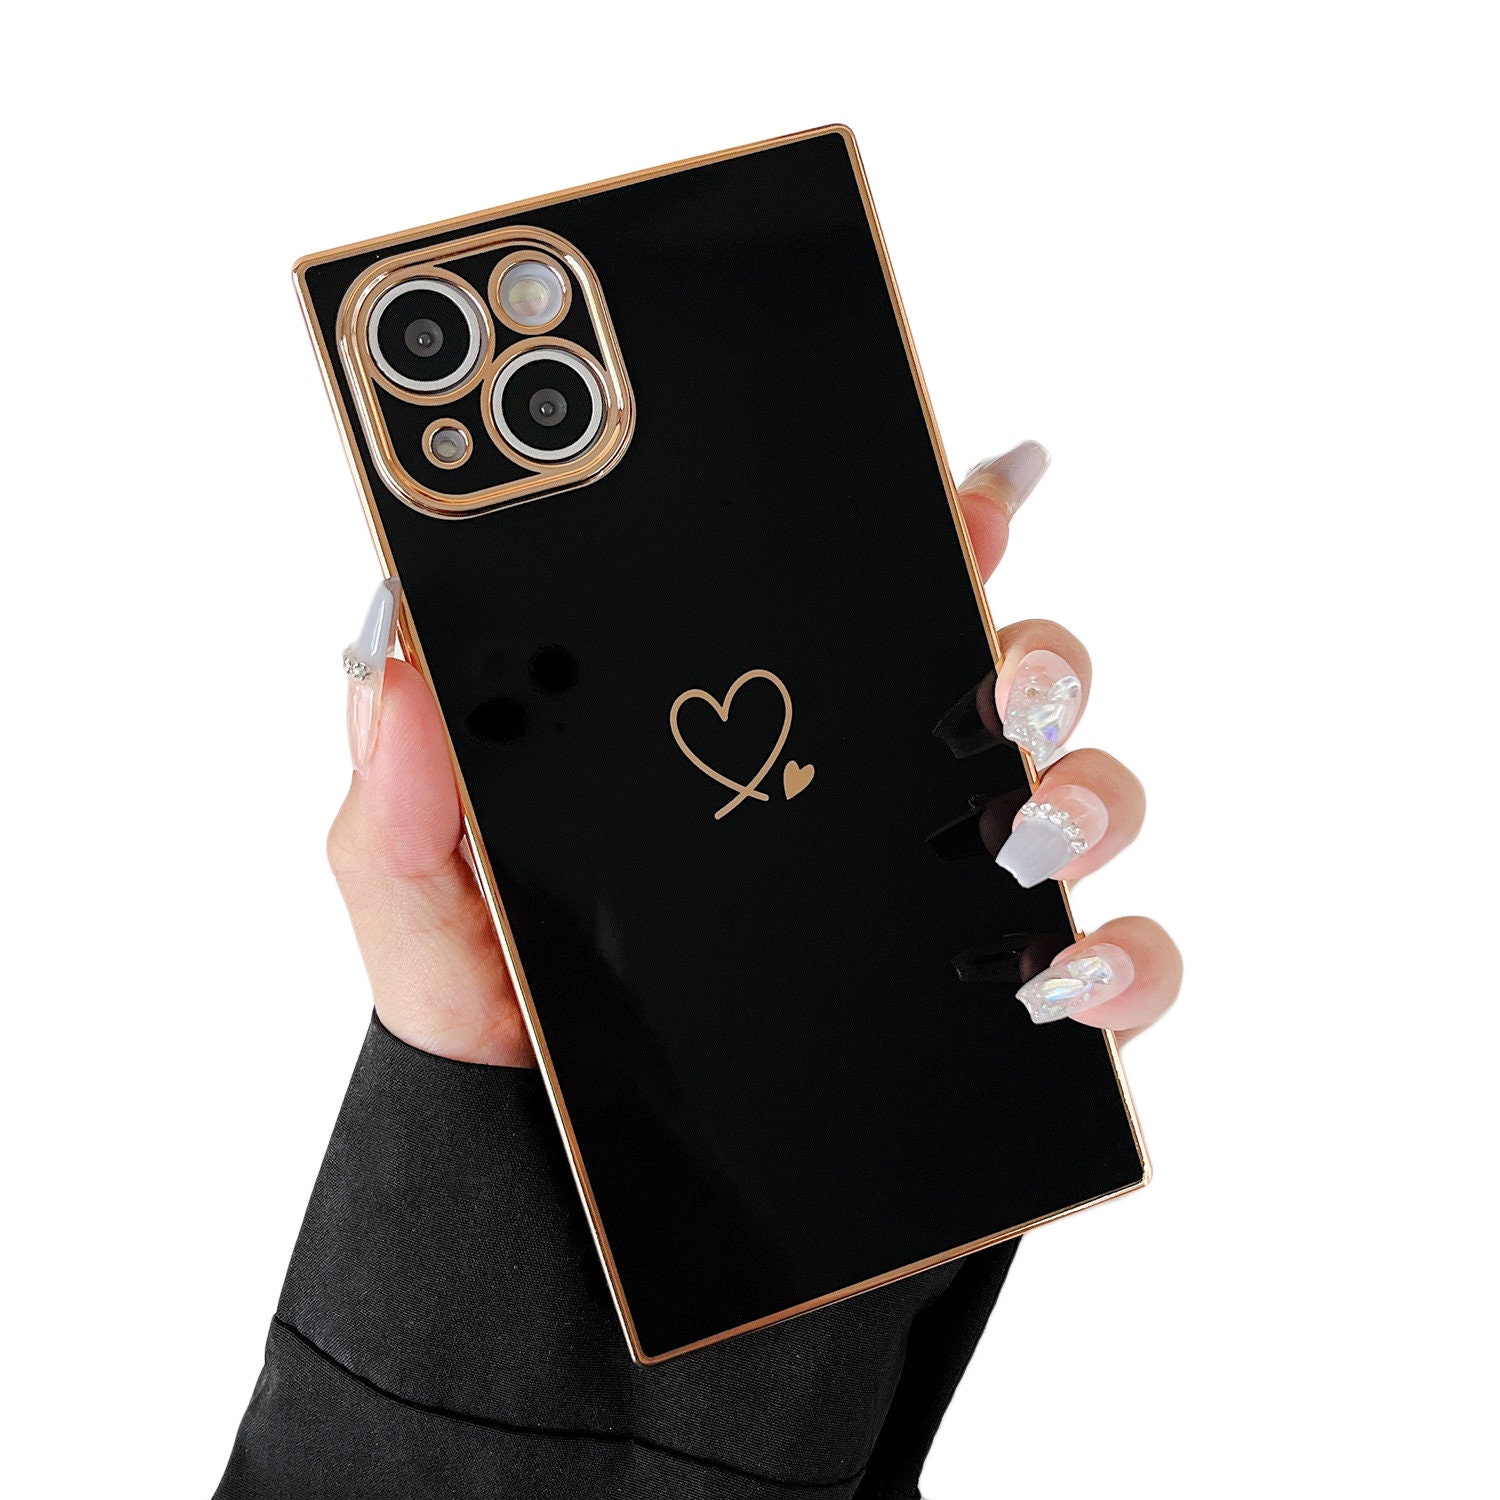 LV iPhone case – Buy your luxury phone cases with free shipping on